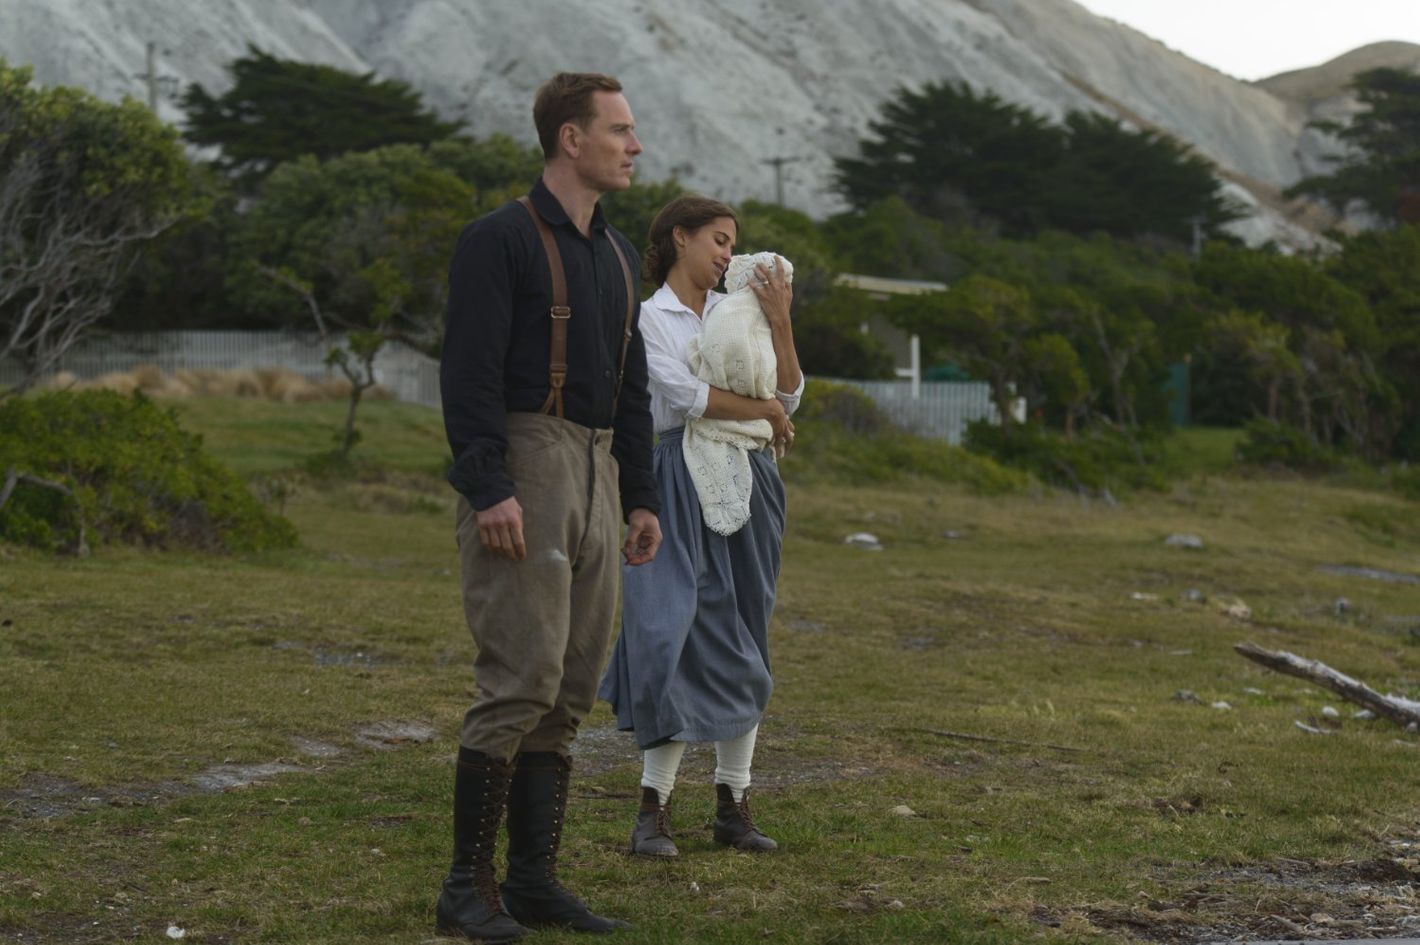 The of The Light Between Oceans Arrives in Waves